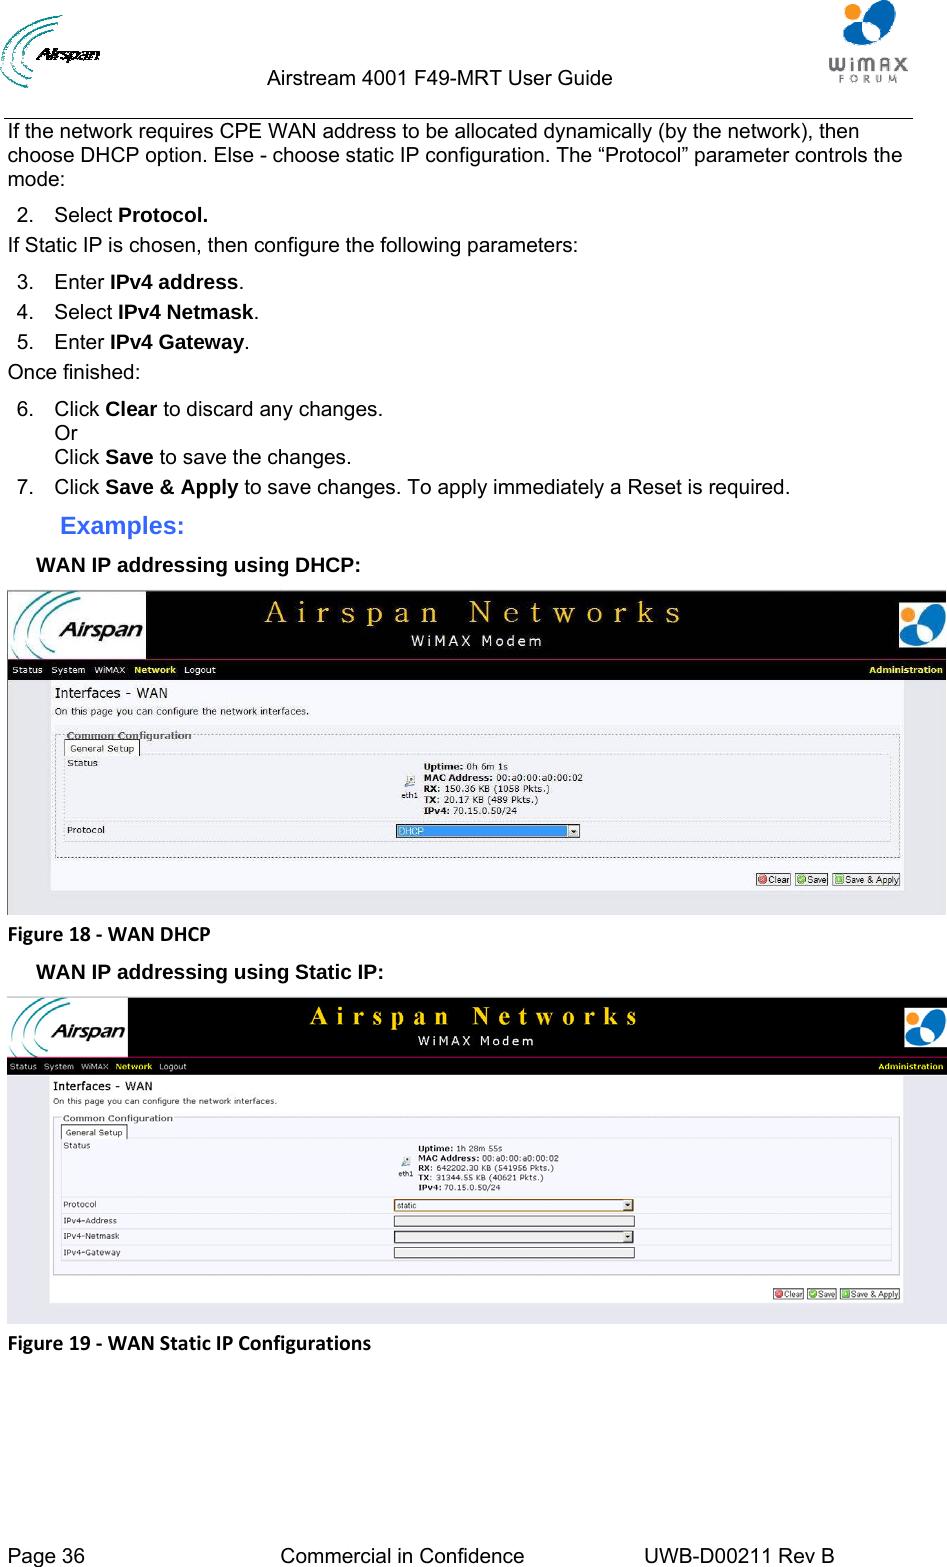                                  Airstream 4001 F49-MRT User Guide  Page 36  Commercial in Confidence  UWB-D00211 Rev B   If the network requires CPE WAN address to be allocated dynamically (by the network), then choose DHCP option. Else - choose static IP configuration. The “Protocol” parameter controls the mode: 2. Select Protocol. If Static IP is chosen, then configure the following parameters: 3. Enter IPv4 address. 4. Select IPv4 Netmask. 5. Enter IPv4 Gateway. Once finished: 6. Click Clear to discard any changes. Or  Click Save to save the changes. 7. Click Save &amp; Apply to save changes. To apply immediately a Reset is required. Examples: WAN IP addressing using DHCP:  Figure18‐WANDHCPWAN IP addressing using Static IP:  Figure19‐WANStaticIPConfigurations